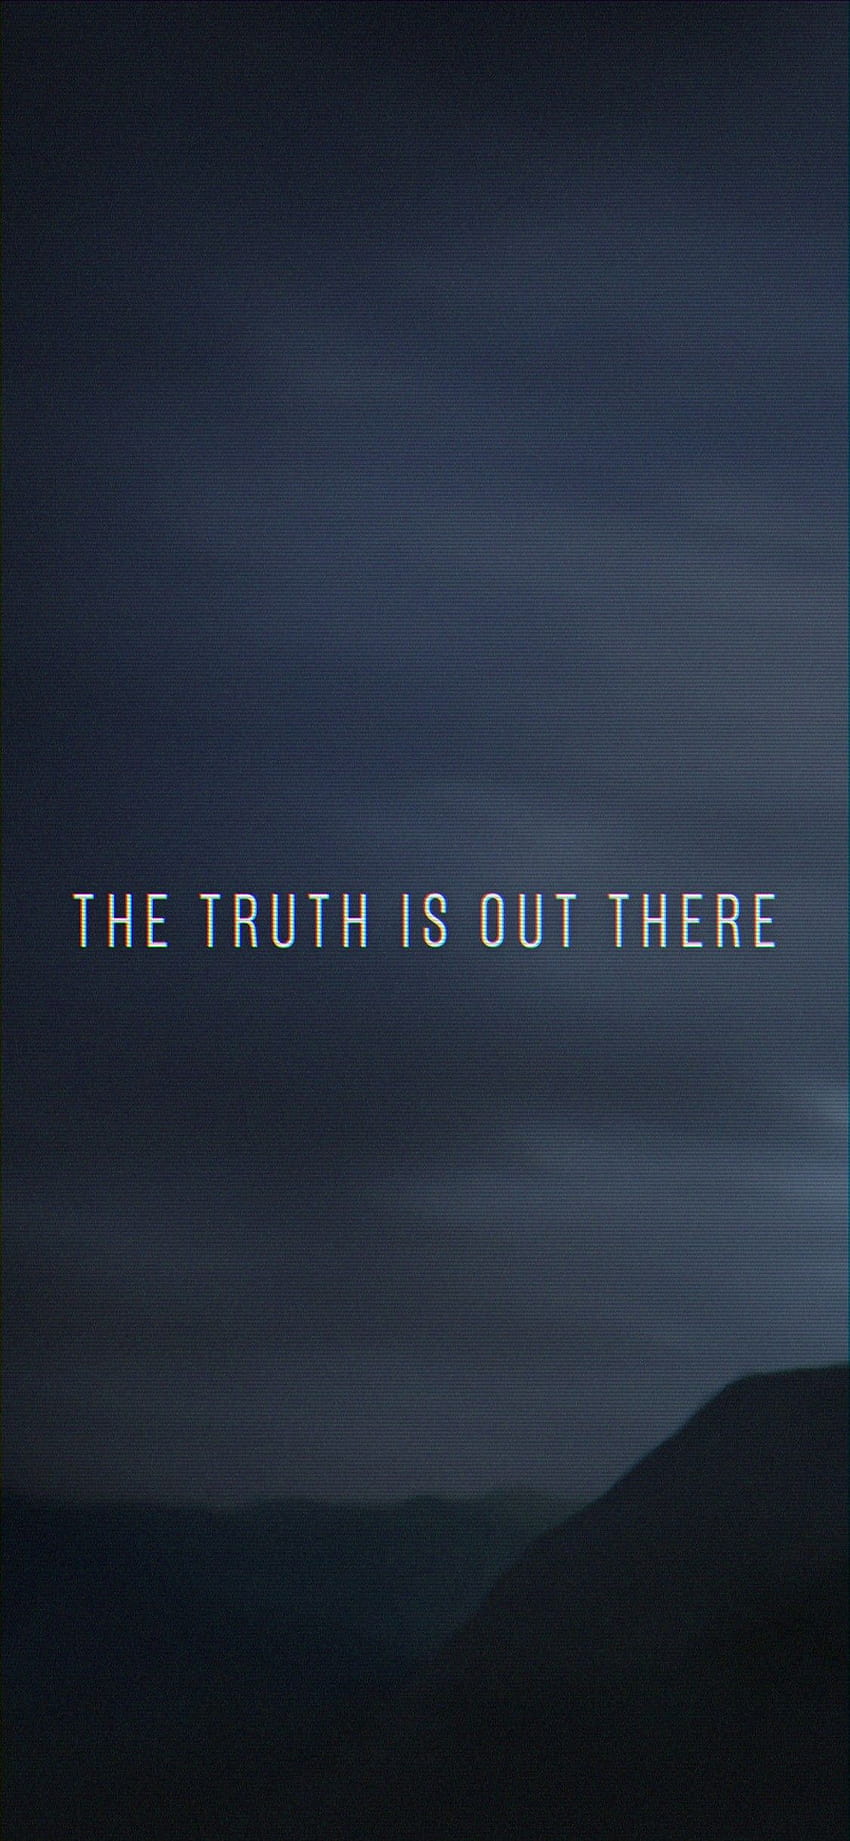 X Files For Iphone Data Src X Files, the x files HD phone wallpaper